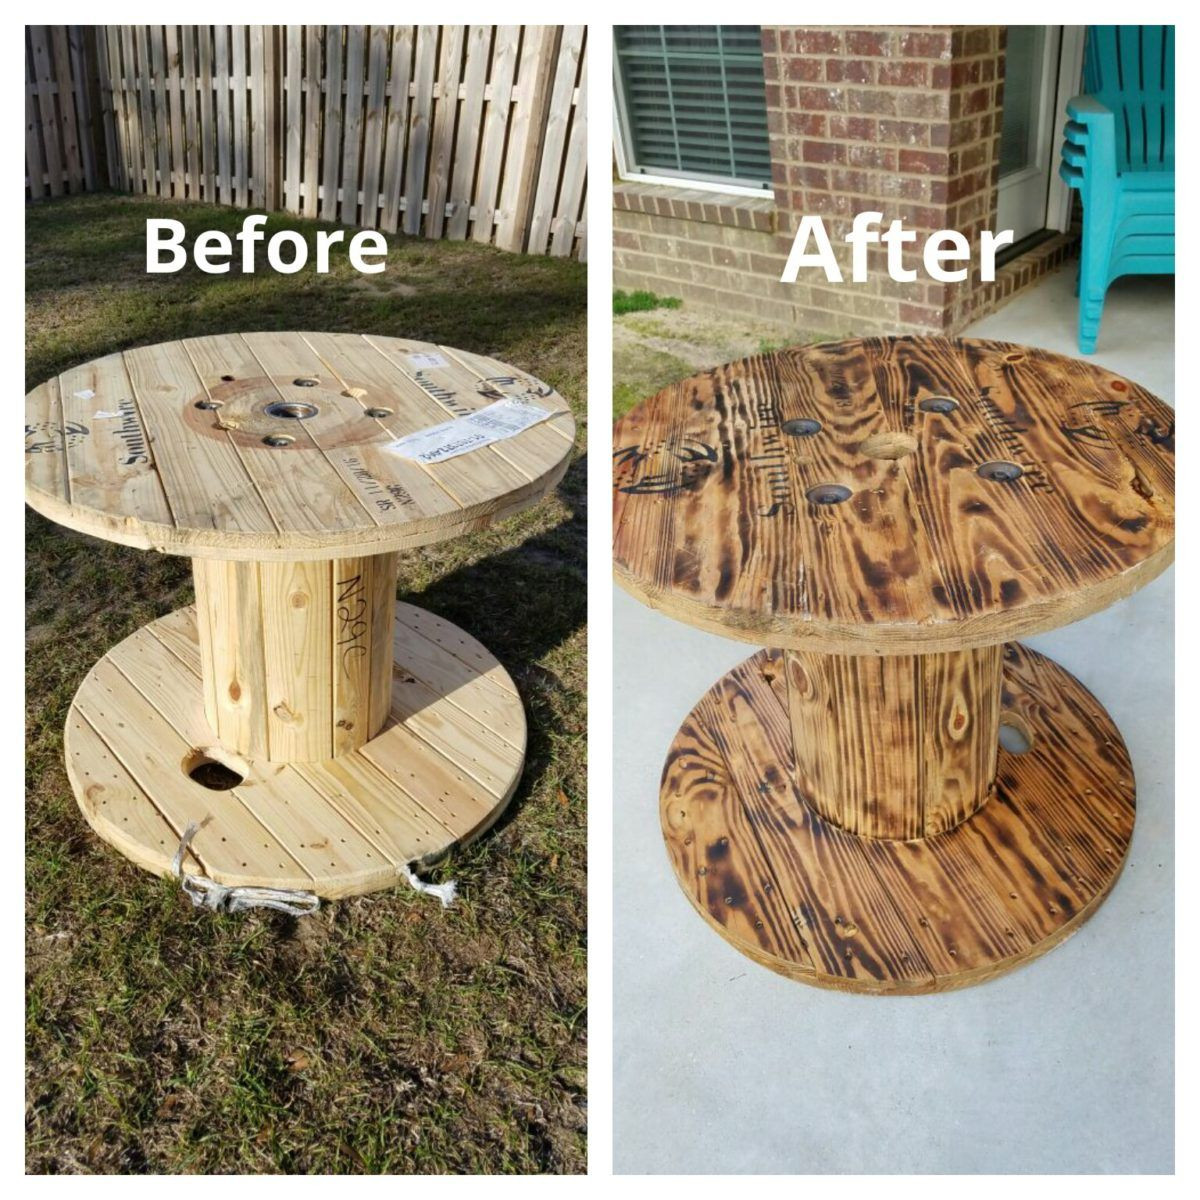 DIY Wooden Spool Projects
 Upcycle Wooden Spools DIY in 2020